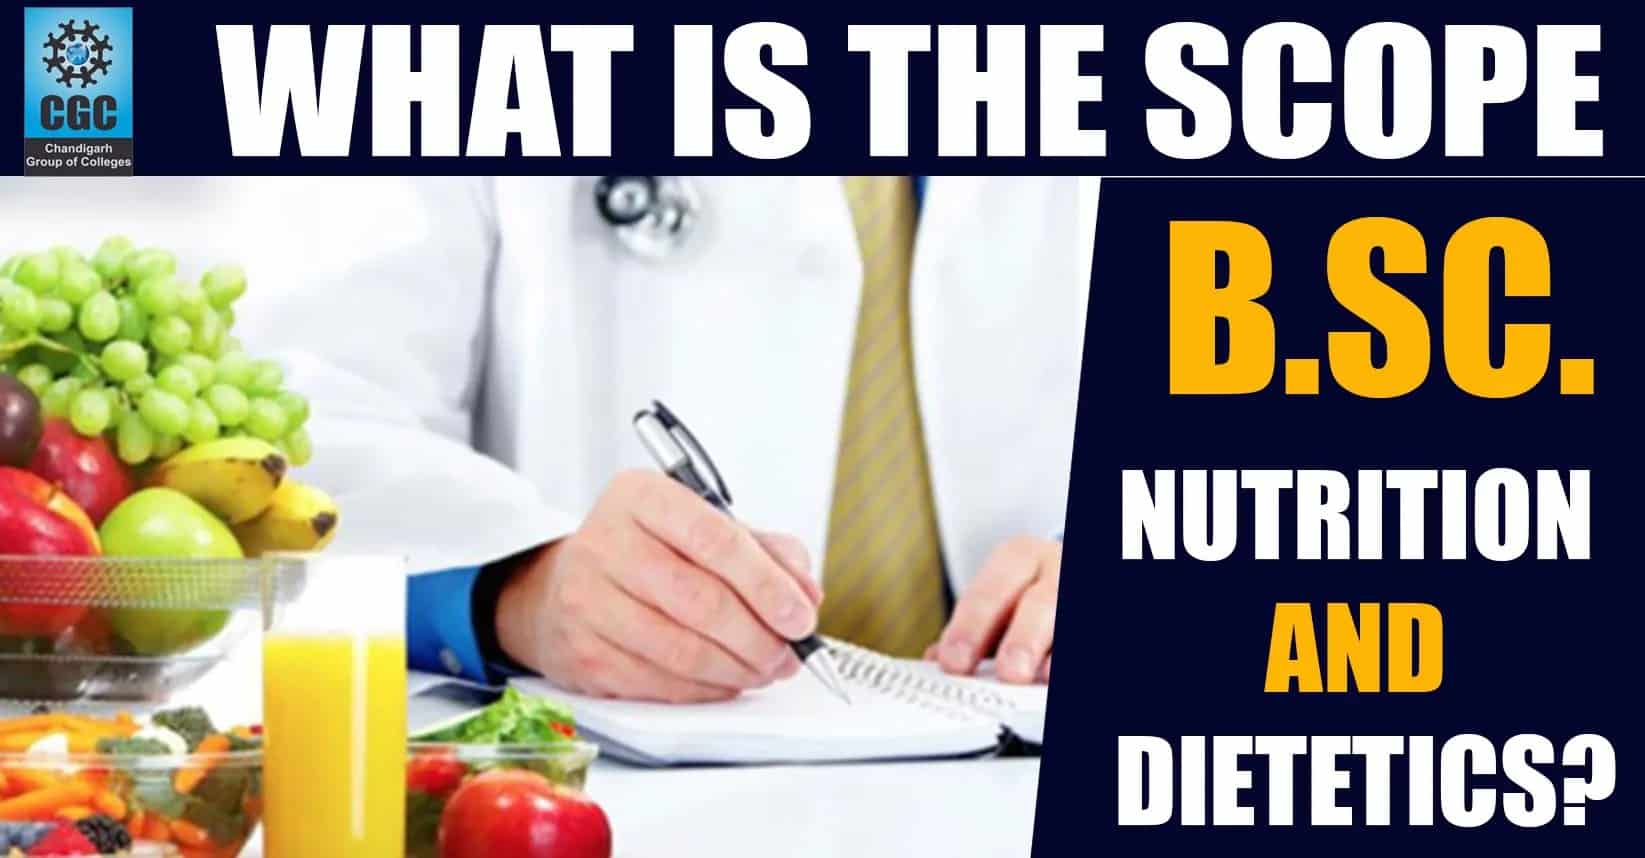 What is the scope of B.Sc. Nutrition and Dietetics? 